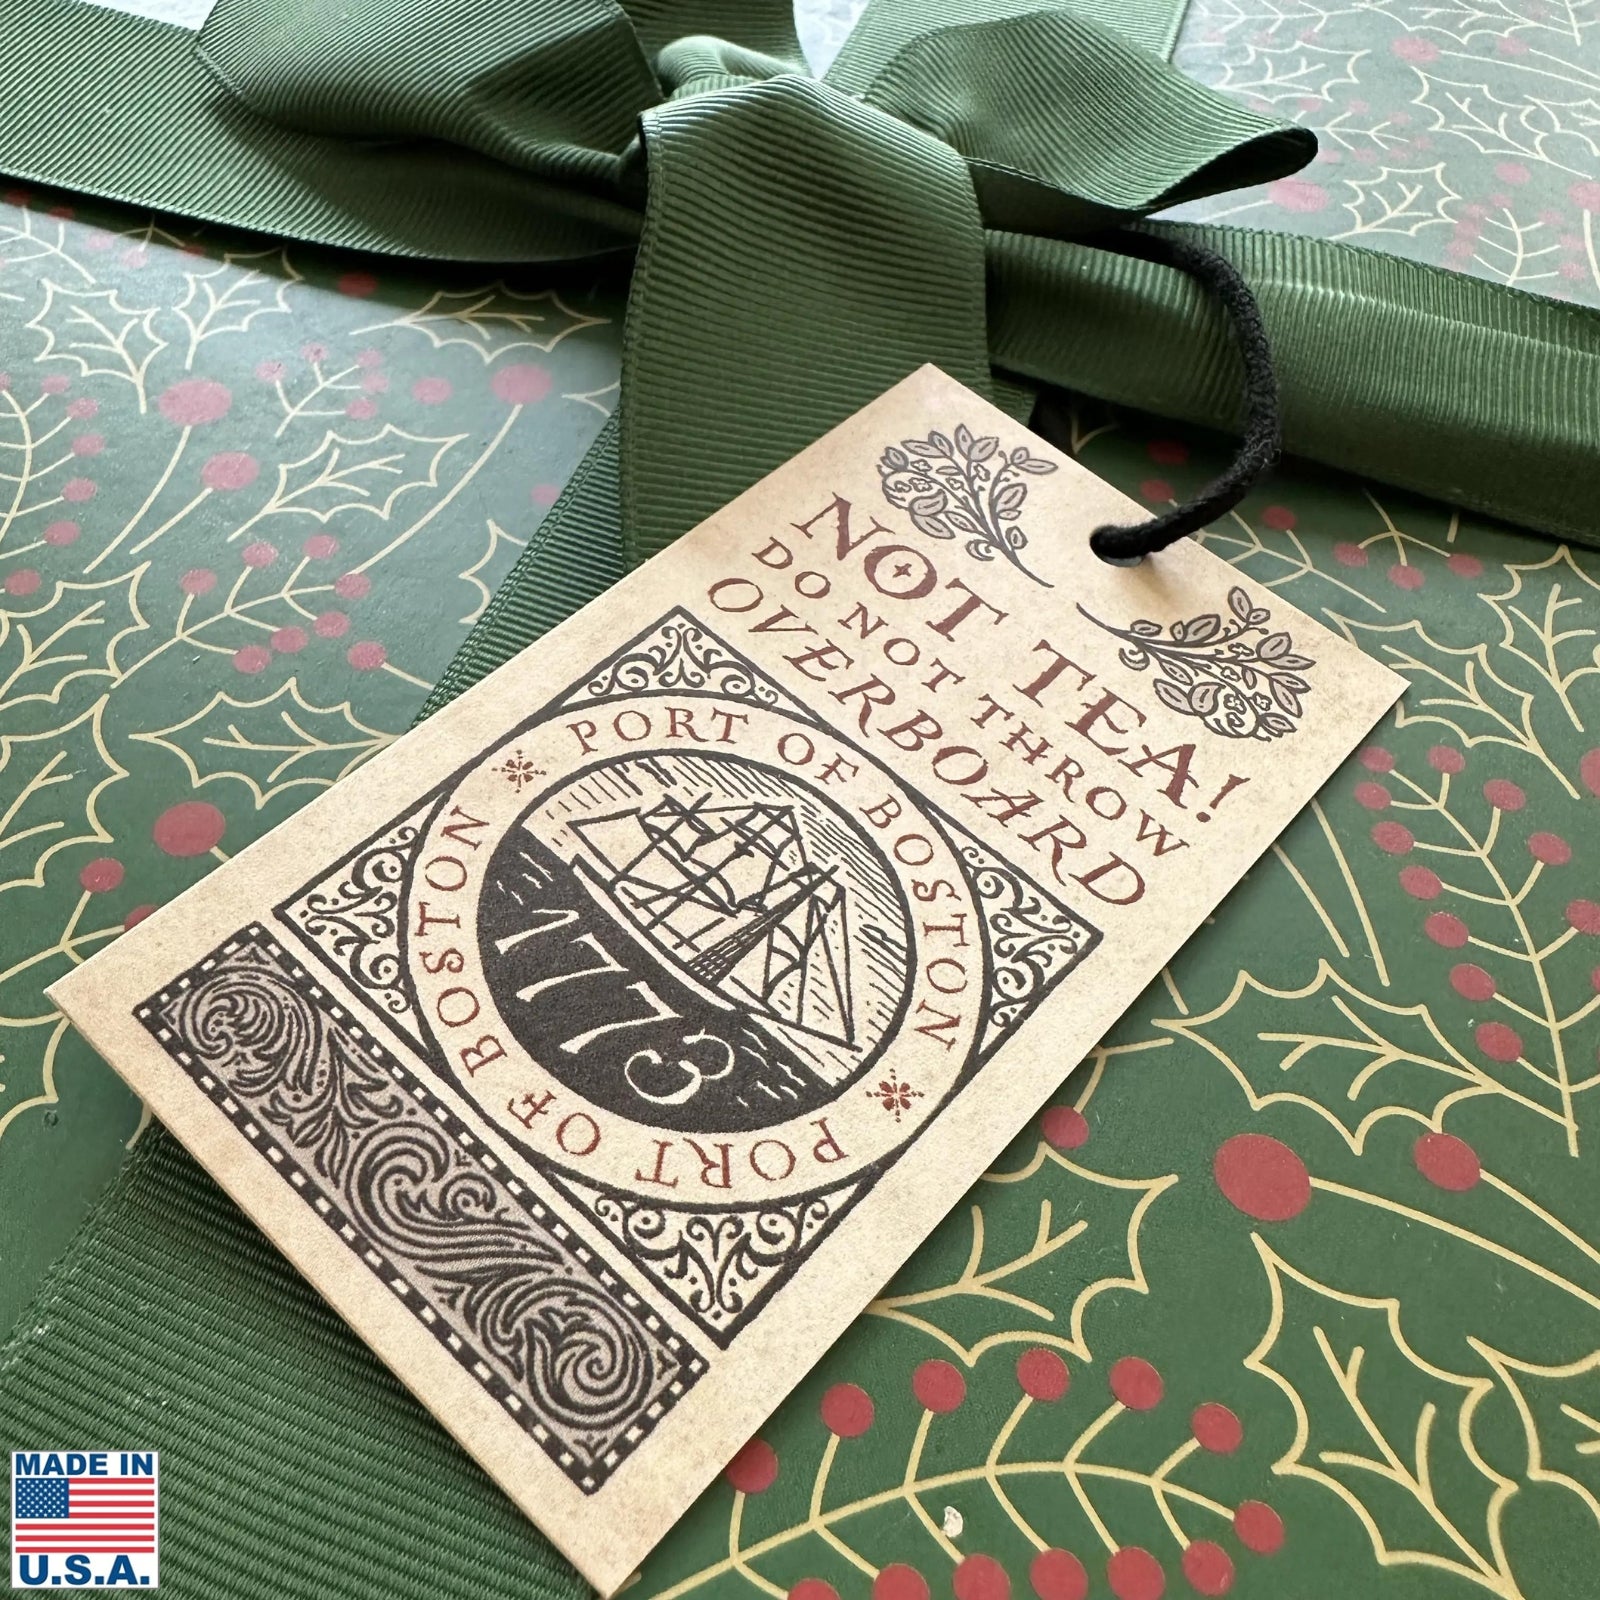 Boston Tea Party Gift Tag from The History List store